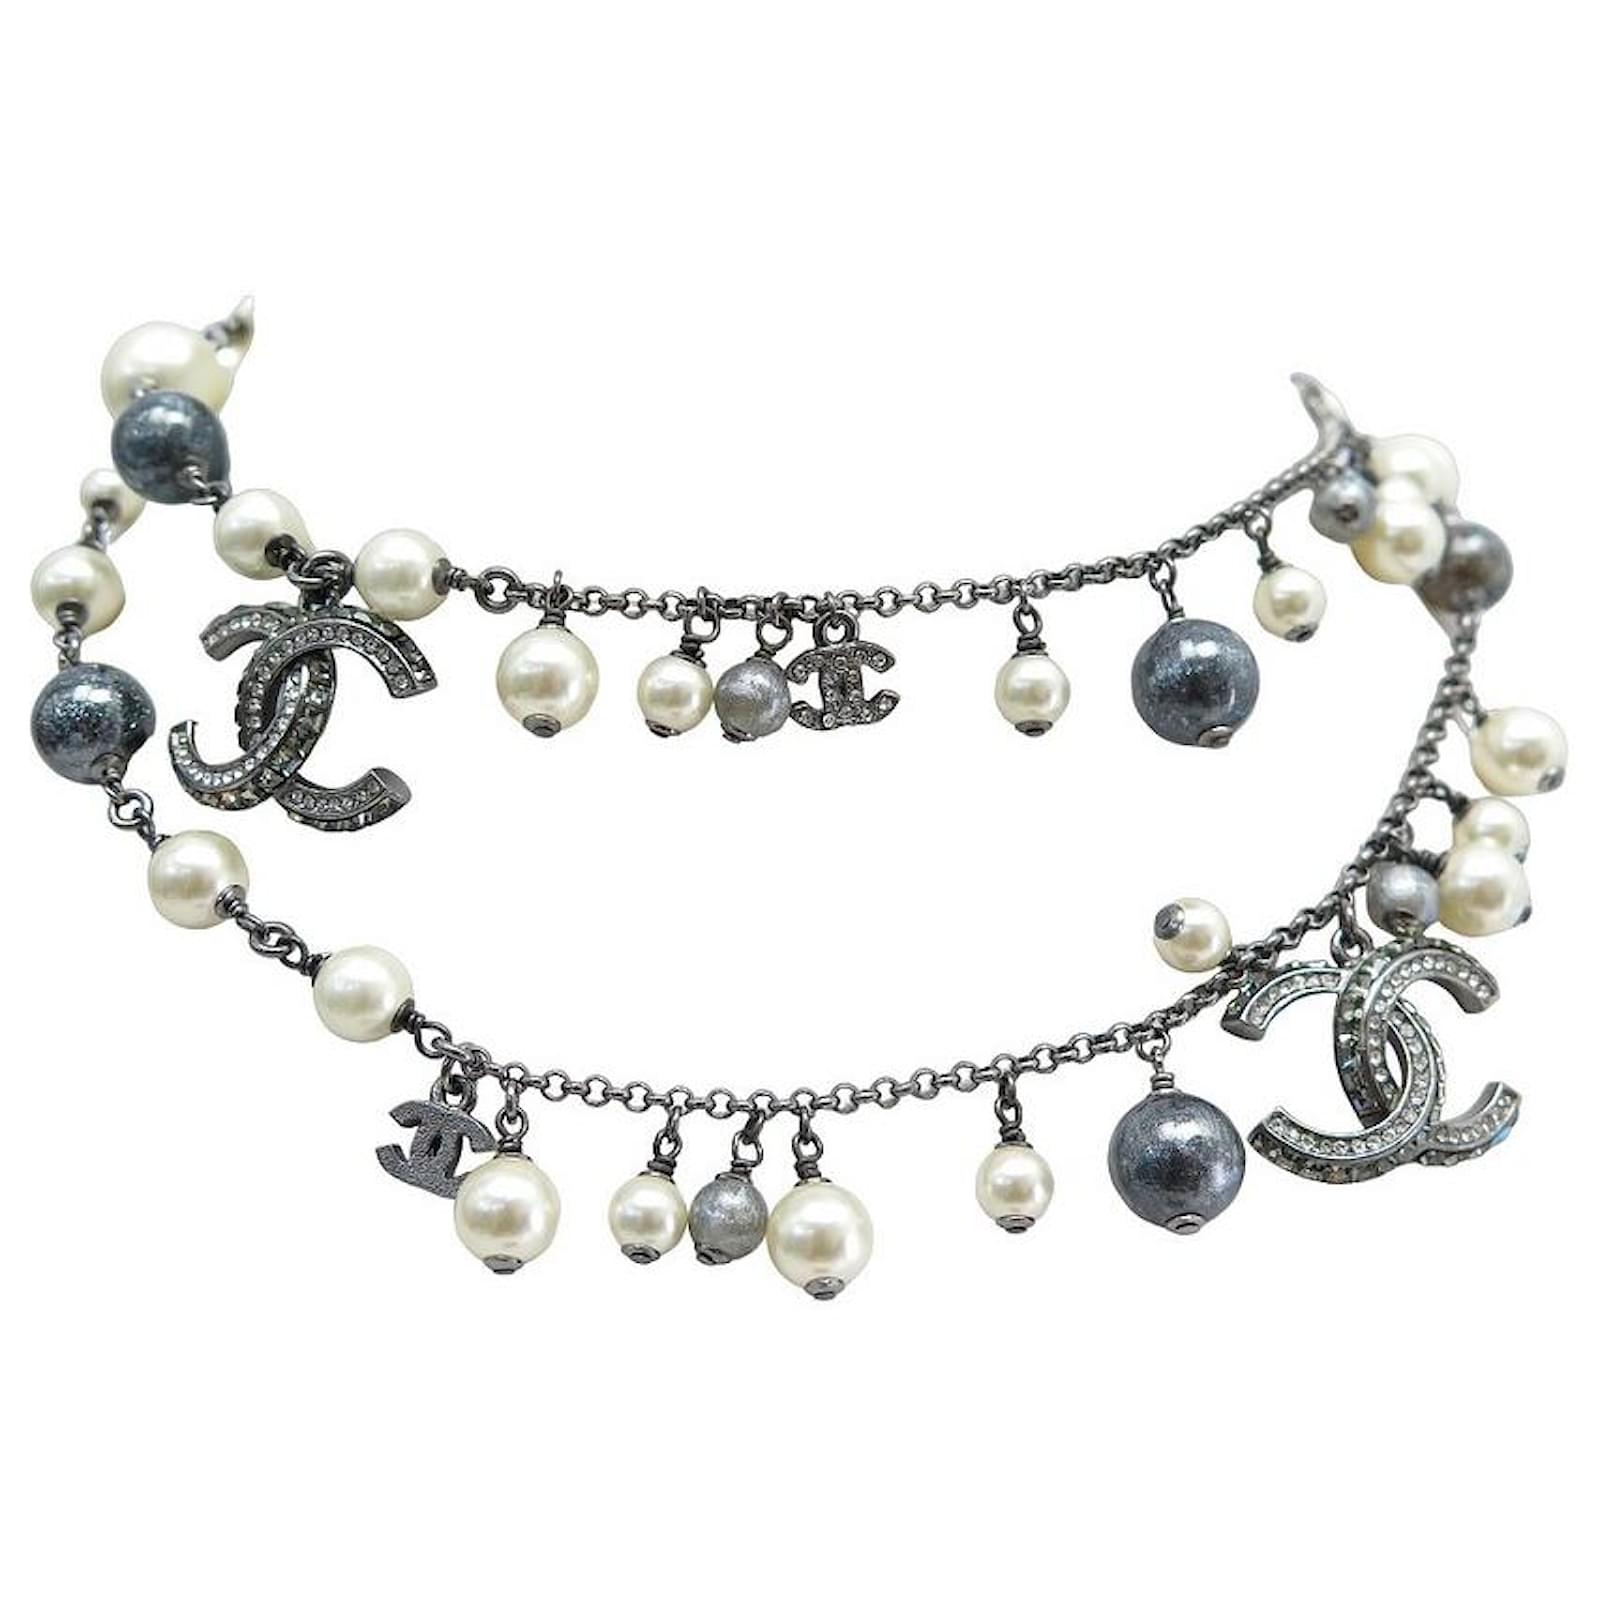 Chanel Pre-Owned Cc Faux Pearl Necklace in Metallic